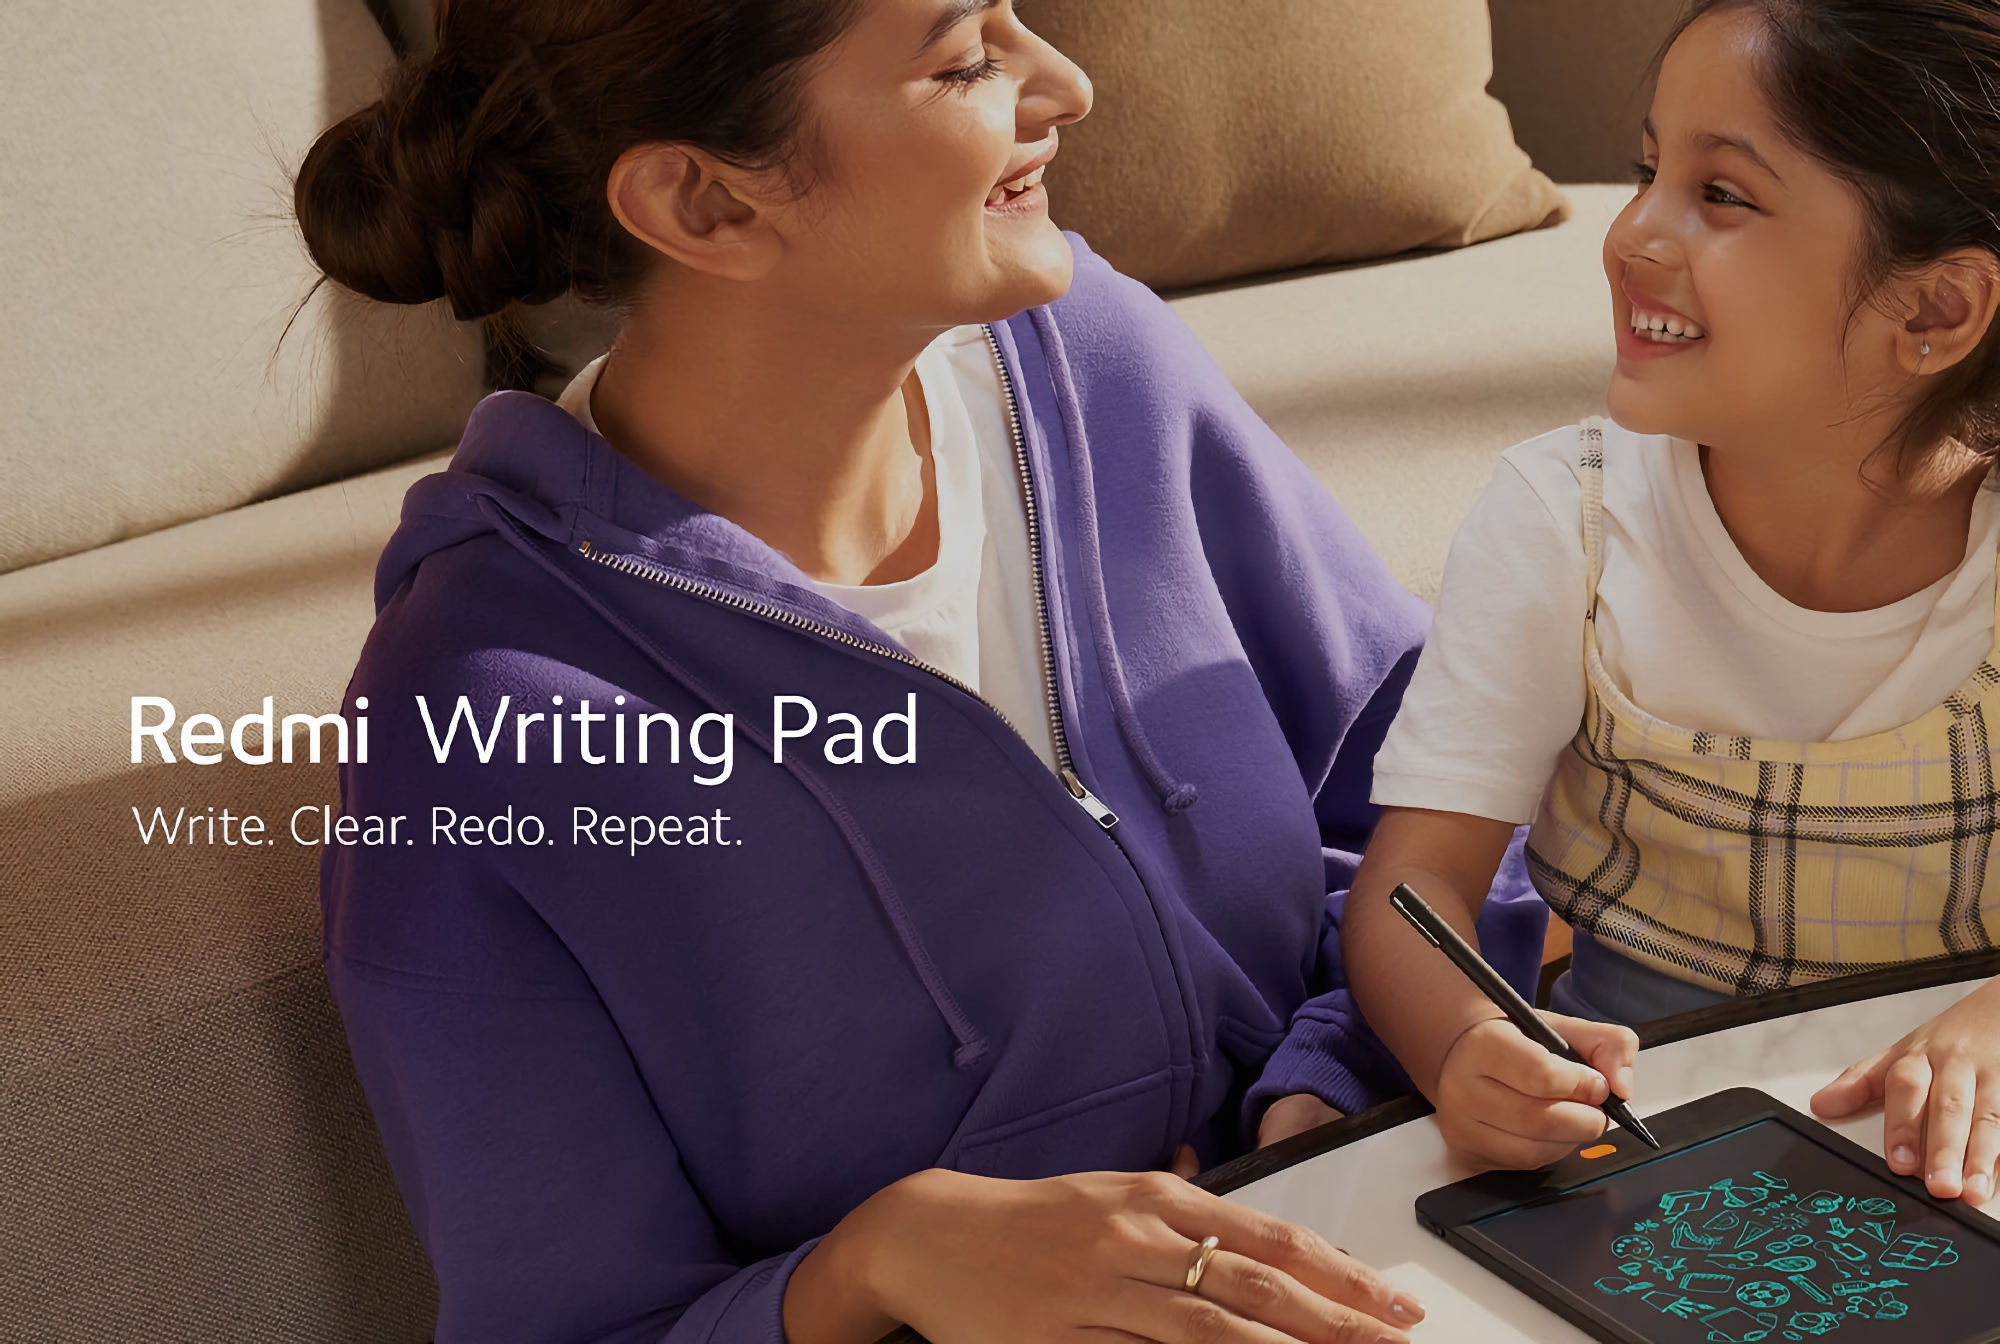 Redmi Writing Pad: drawing tablet with 8.5″ LCD screen and stylus for less than $10